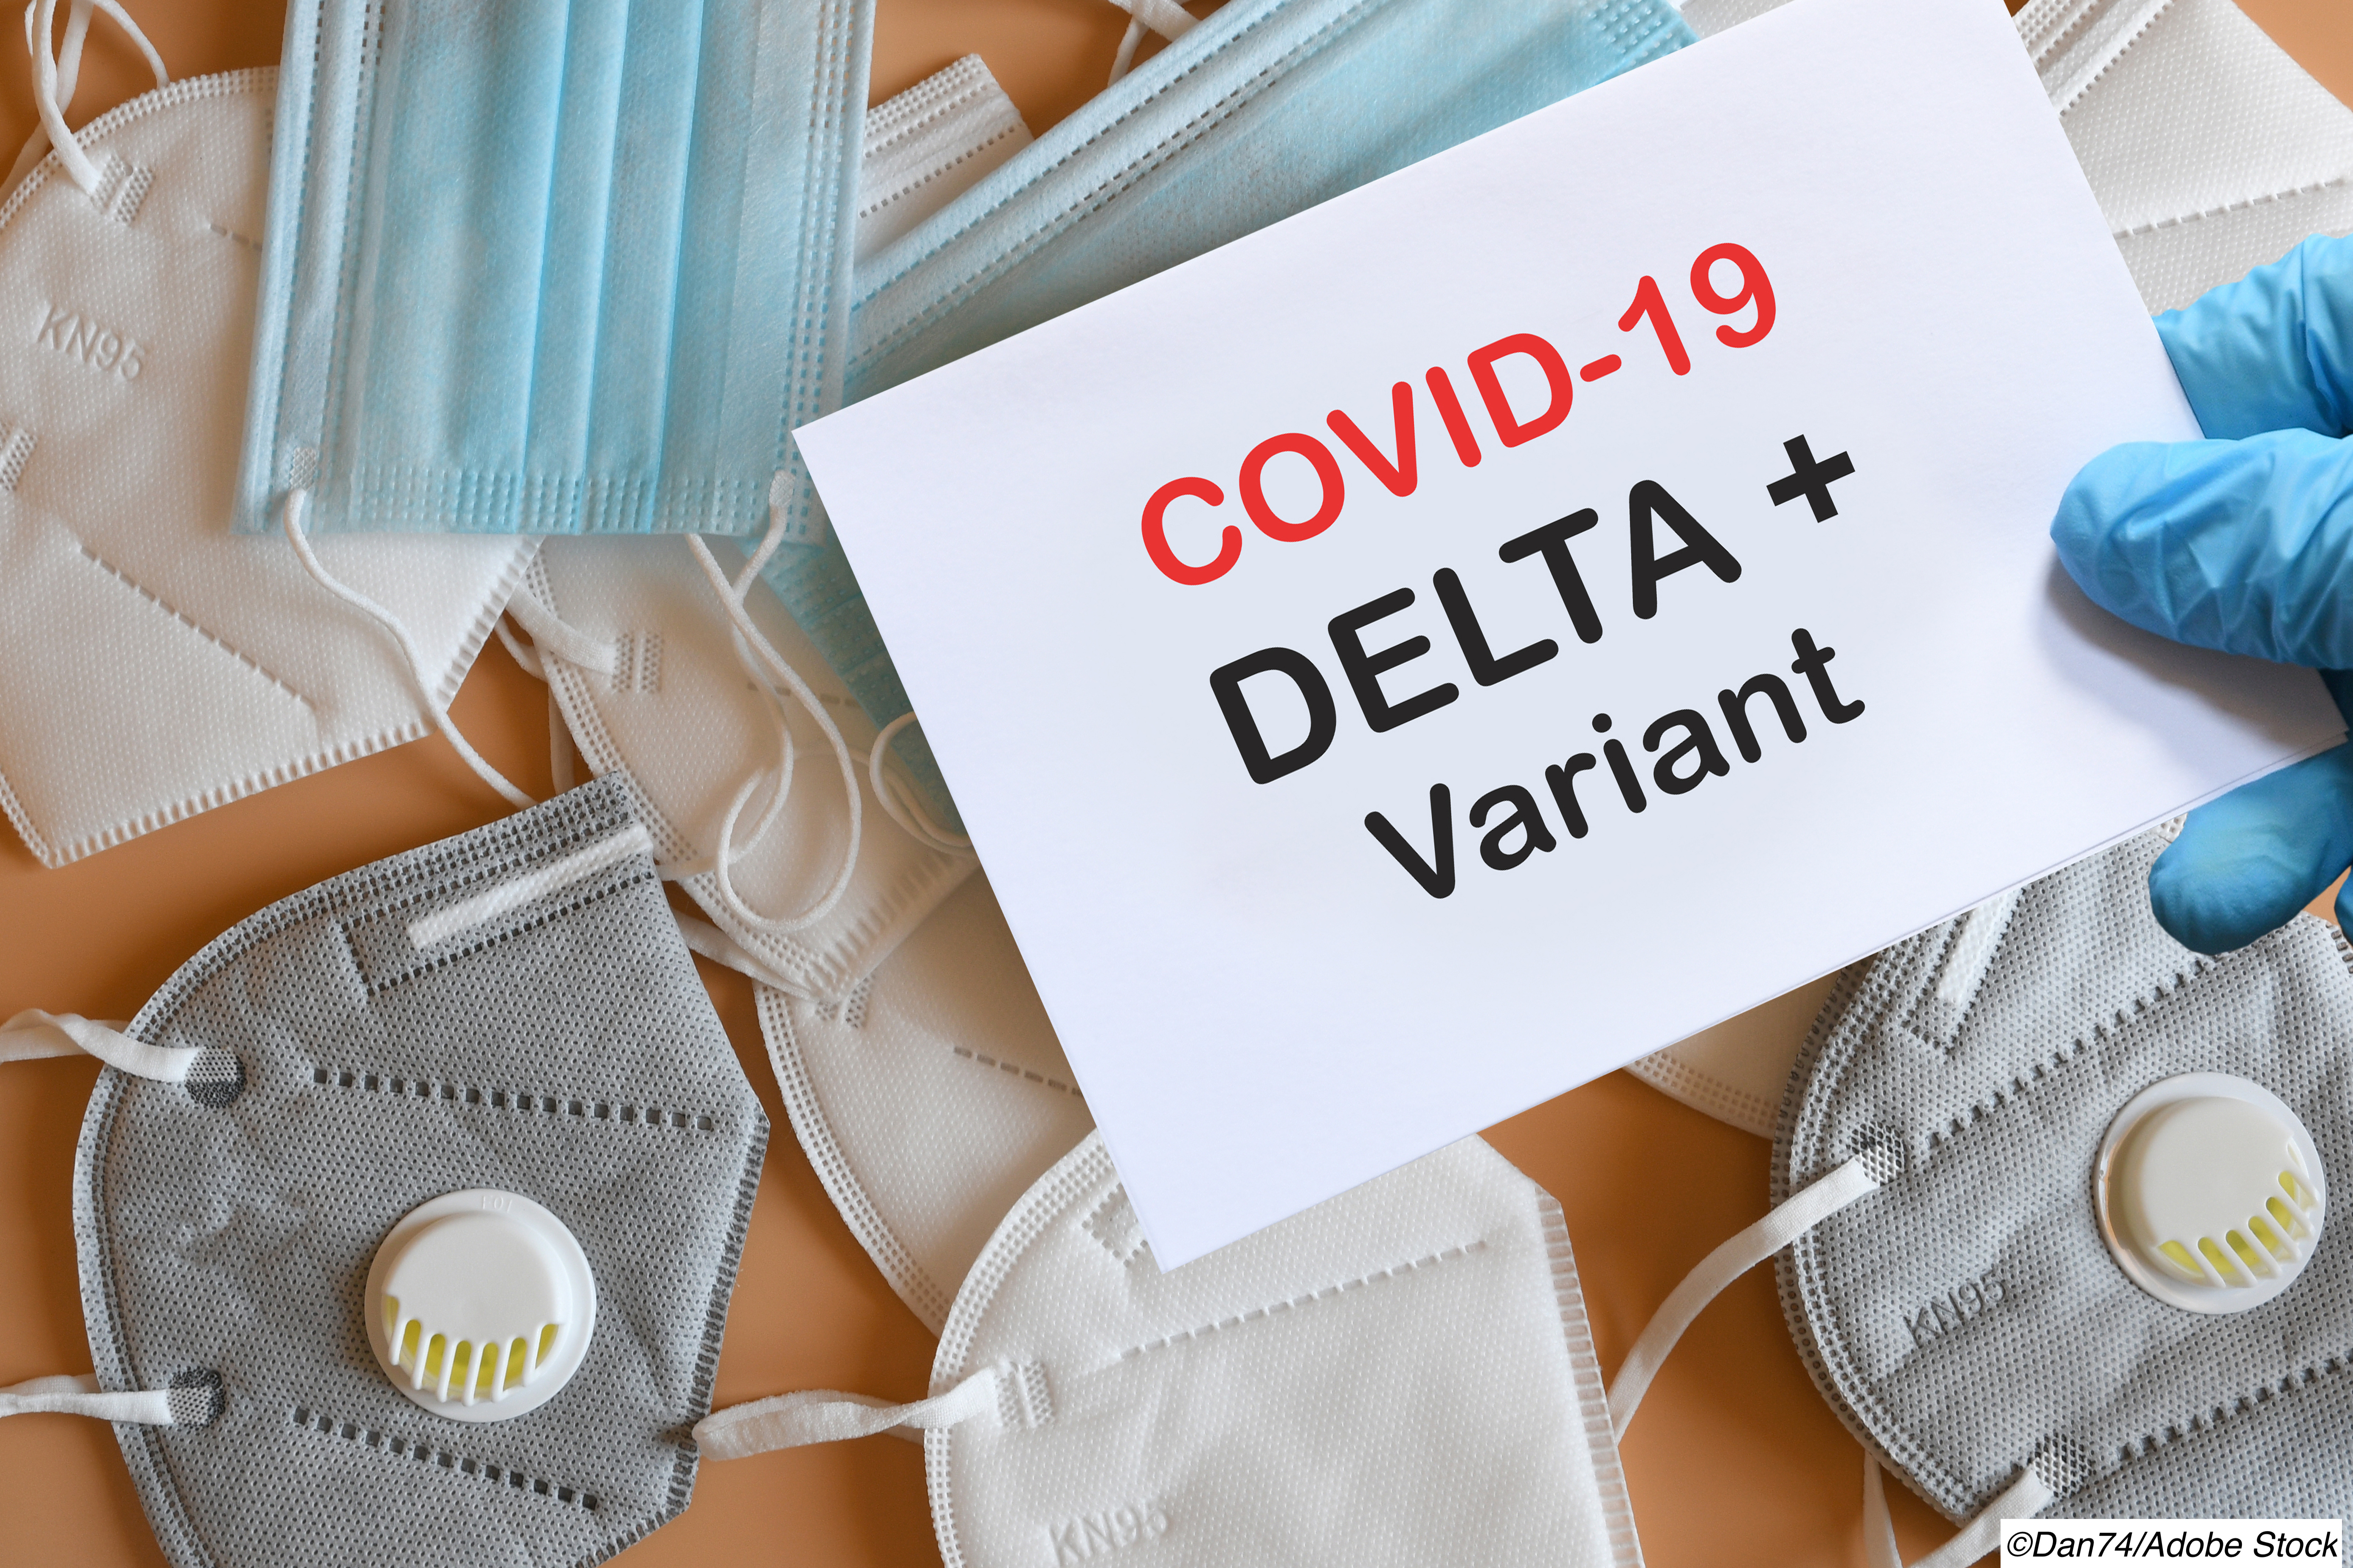 Covid-19: Study Confirms Waning Protection in Months Following Vaccination